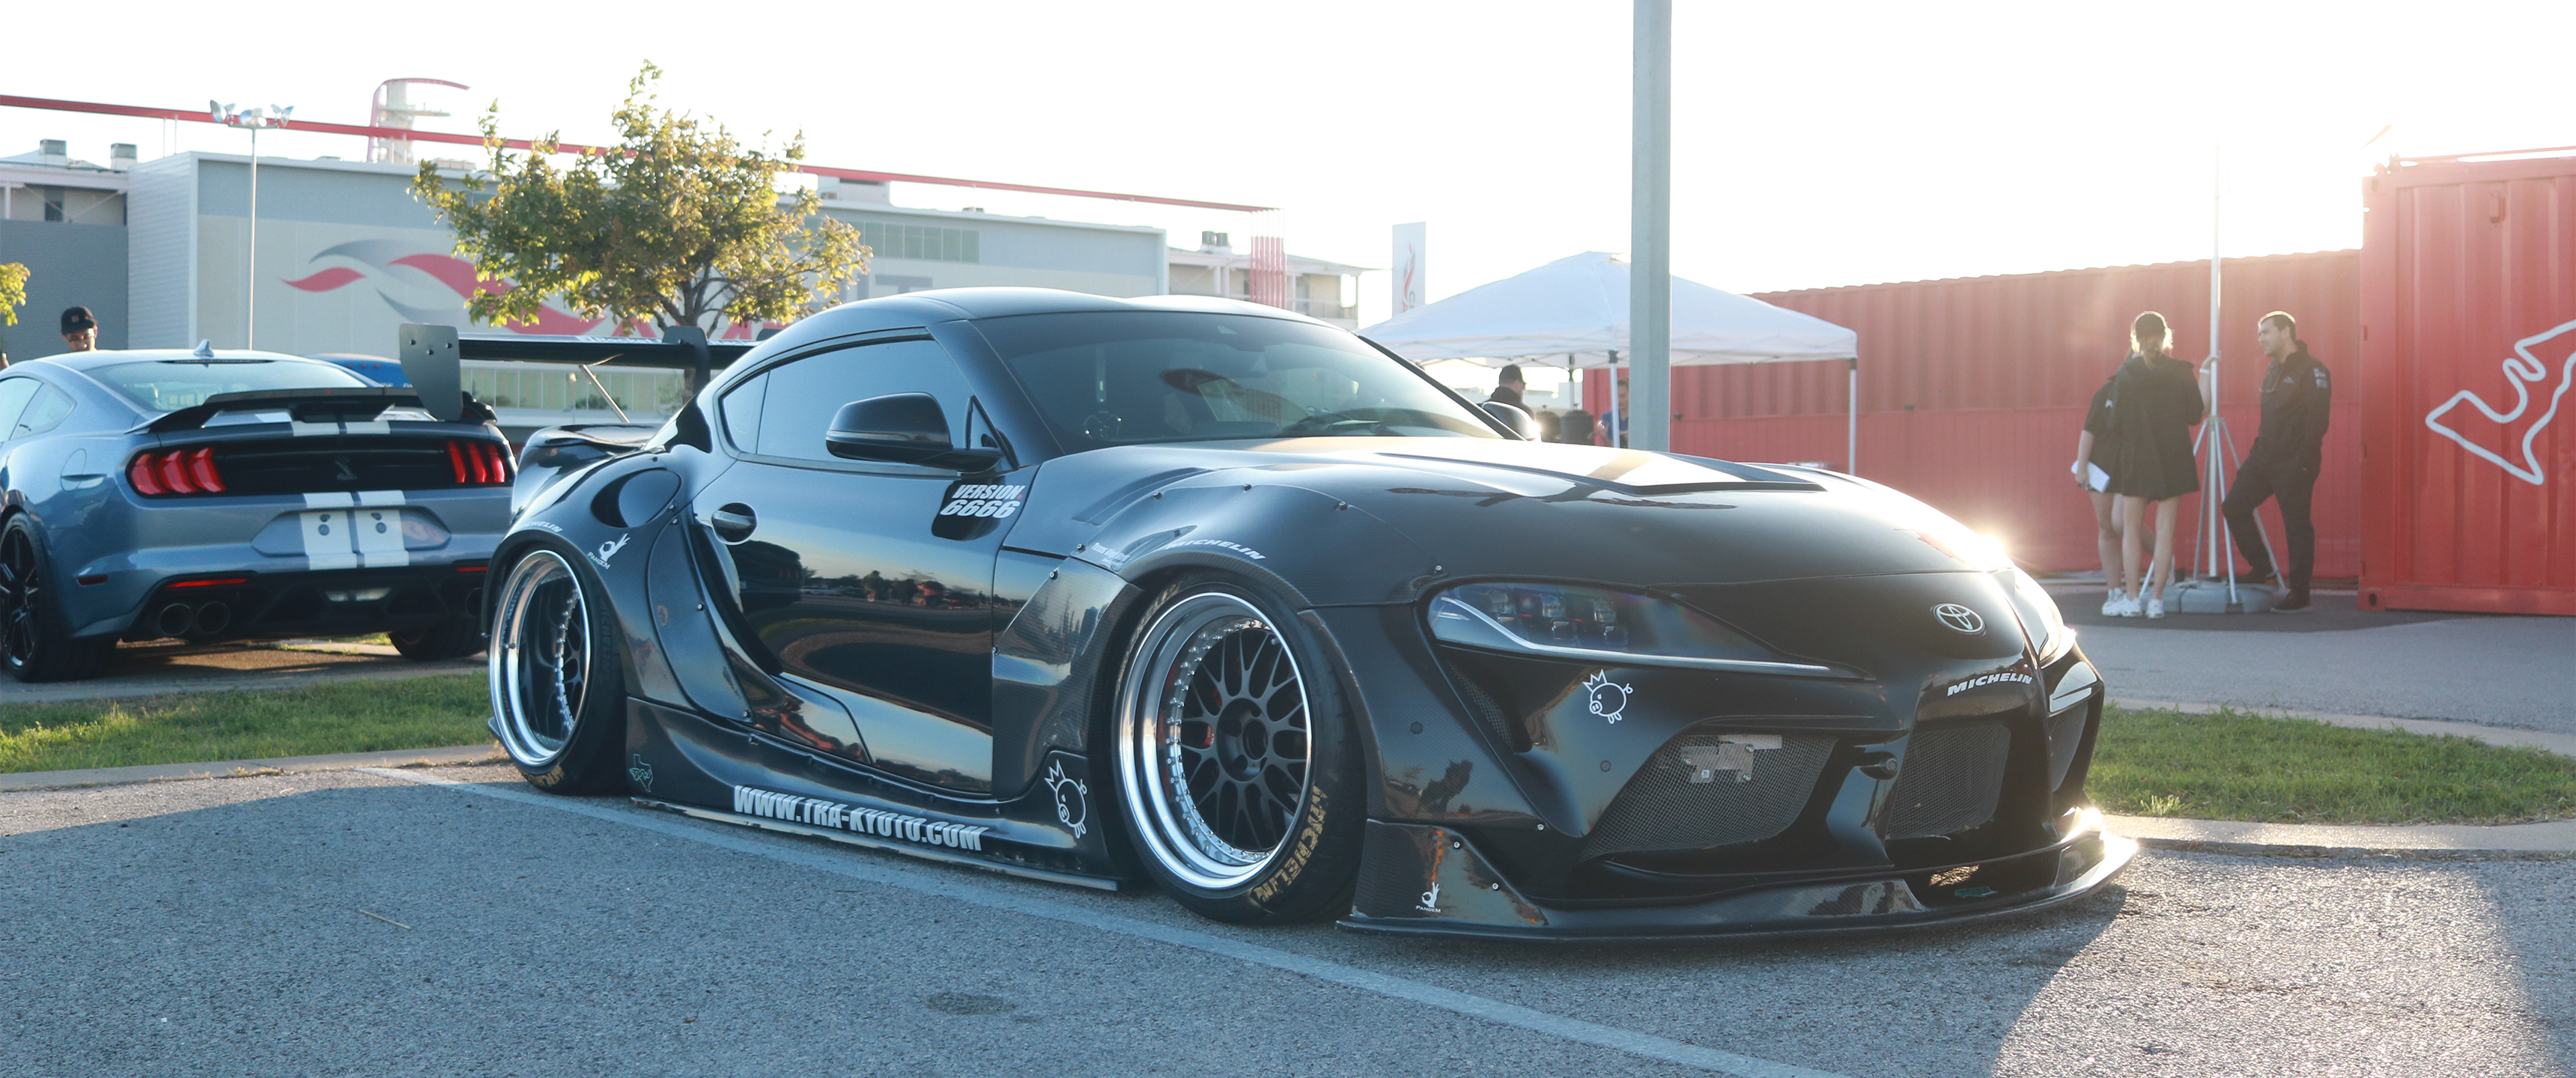 General 3440x1440 car stance (cars) Toyota Toyota Supra frontal view sunlight